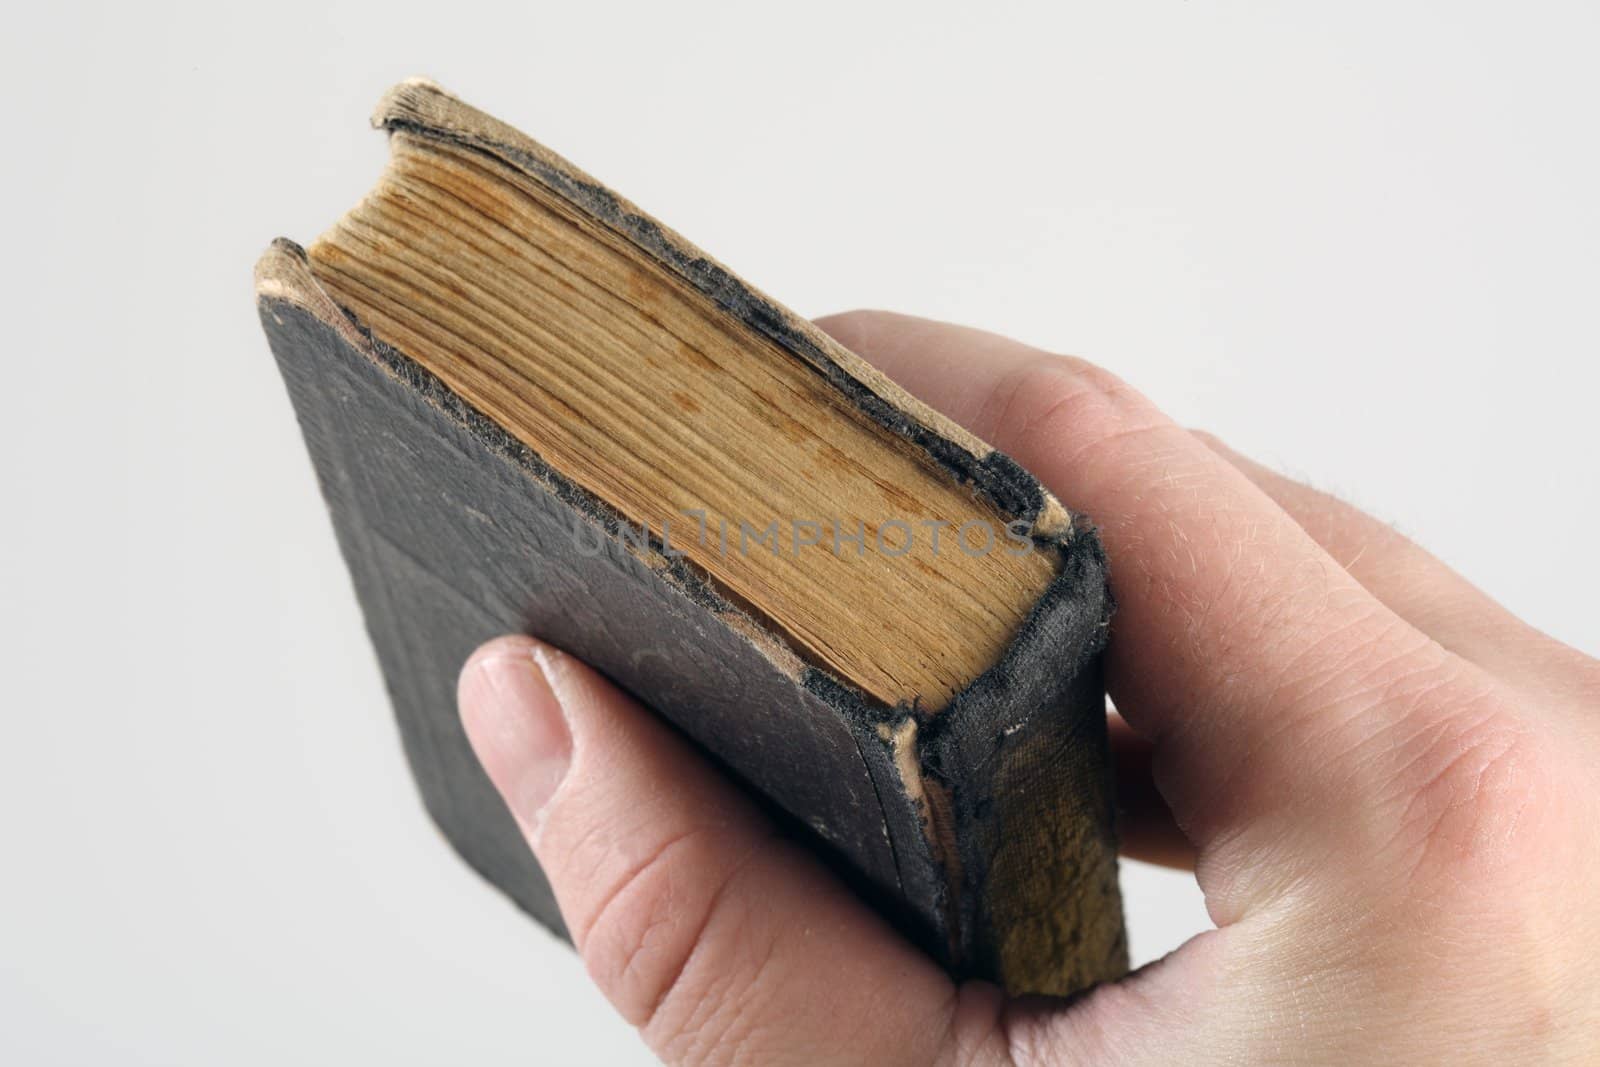 A hand grabbing an old small book